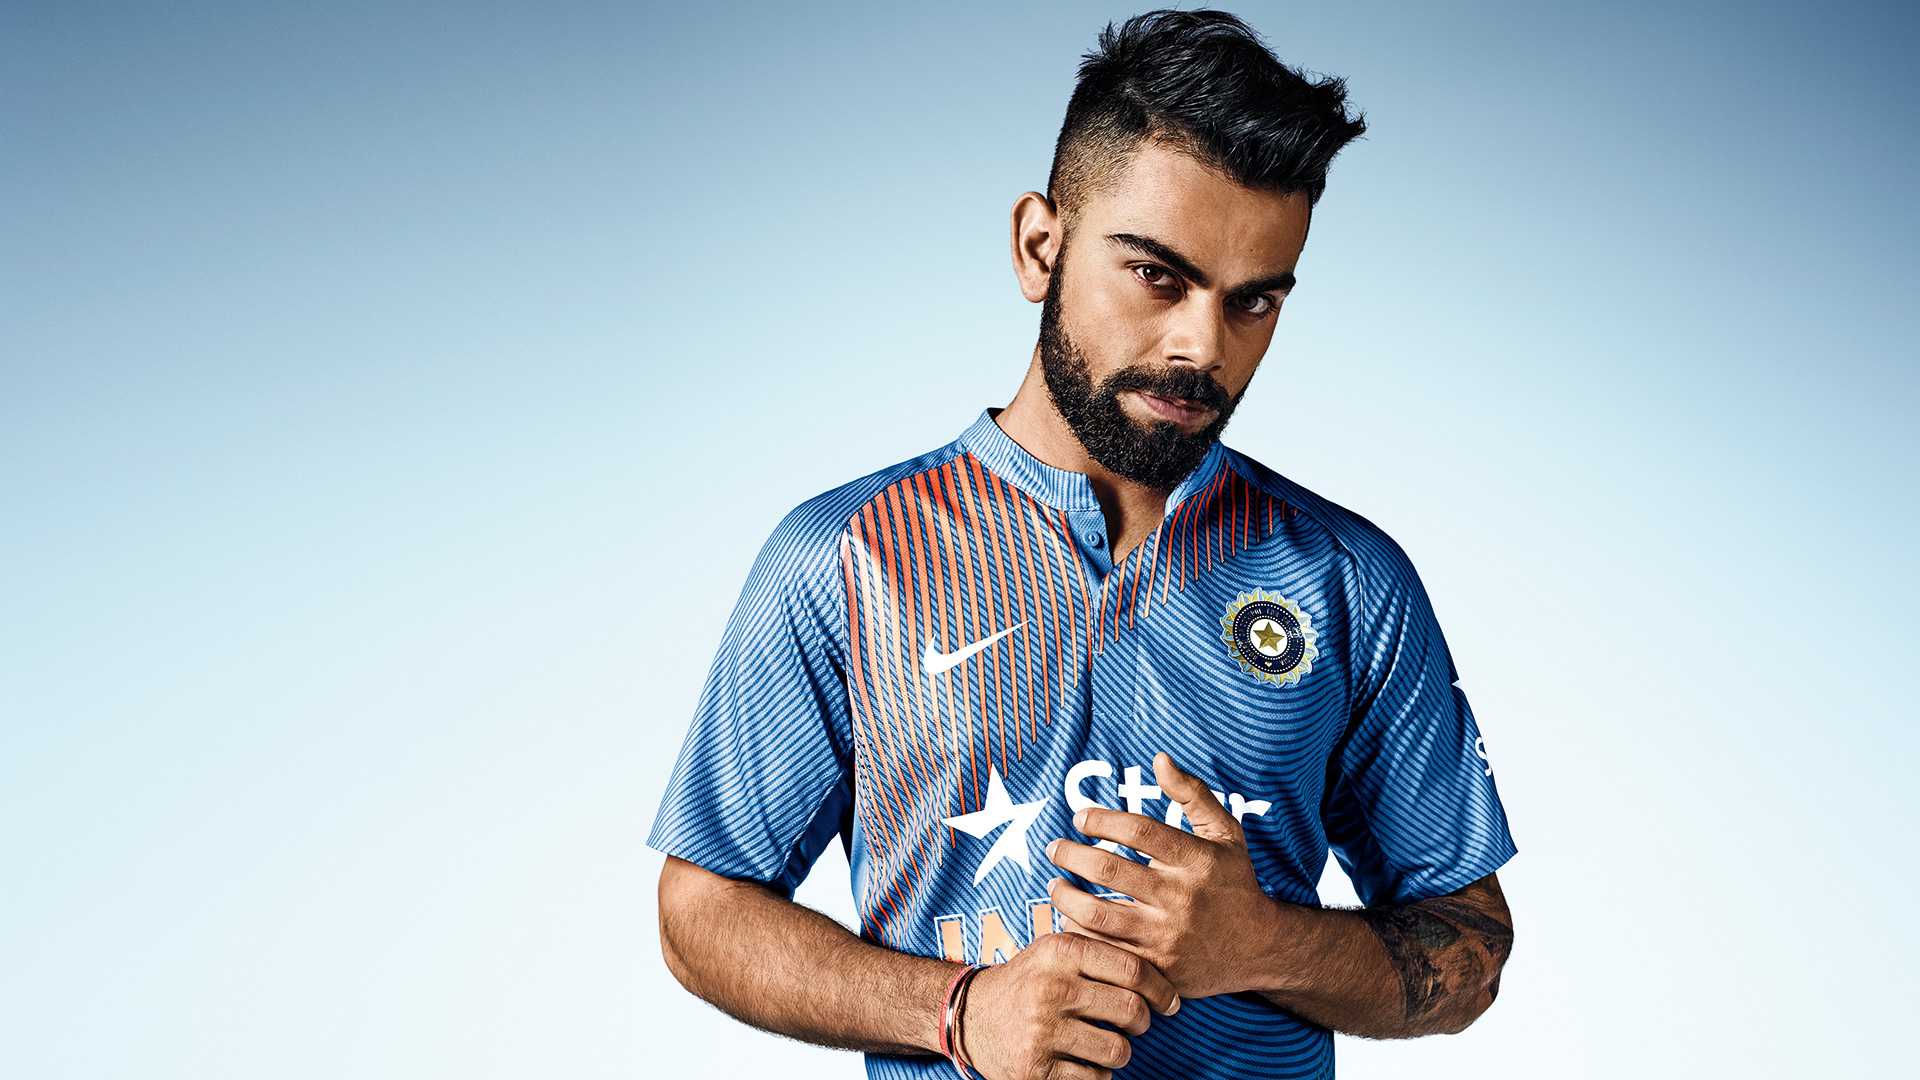 Virat Kohli credits the ICC U19 World Cup for his growth as a player